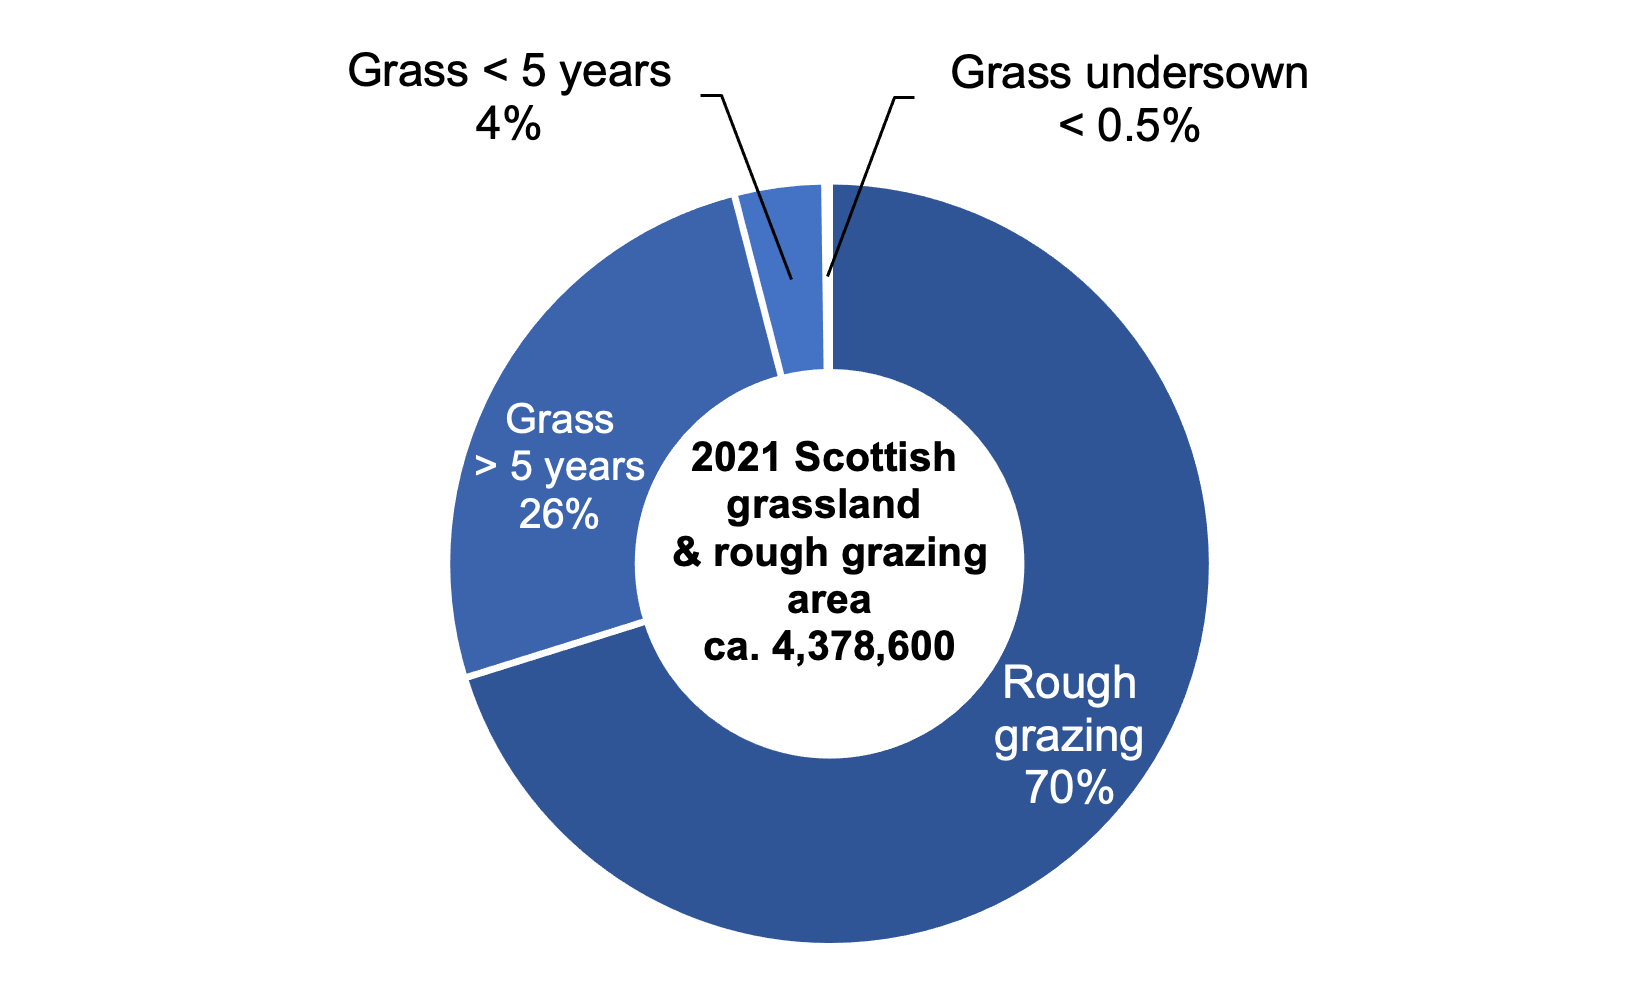 Doughnut chart showing percentage areas of grassland and rough grazing areas in Scotland 2021.